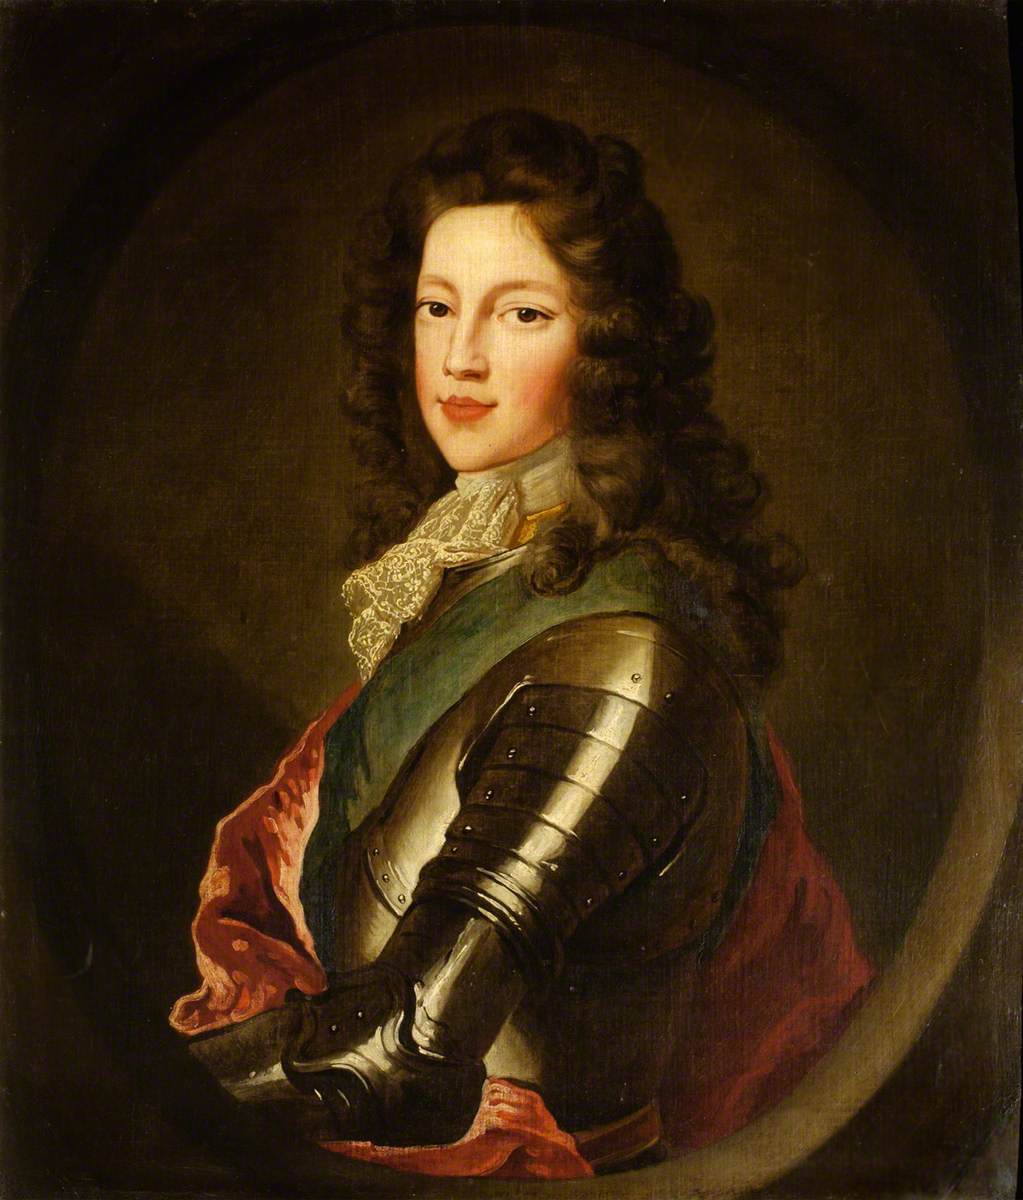 Prince James Stuart, 'The Old Pretender', as a Young Man